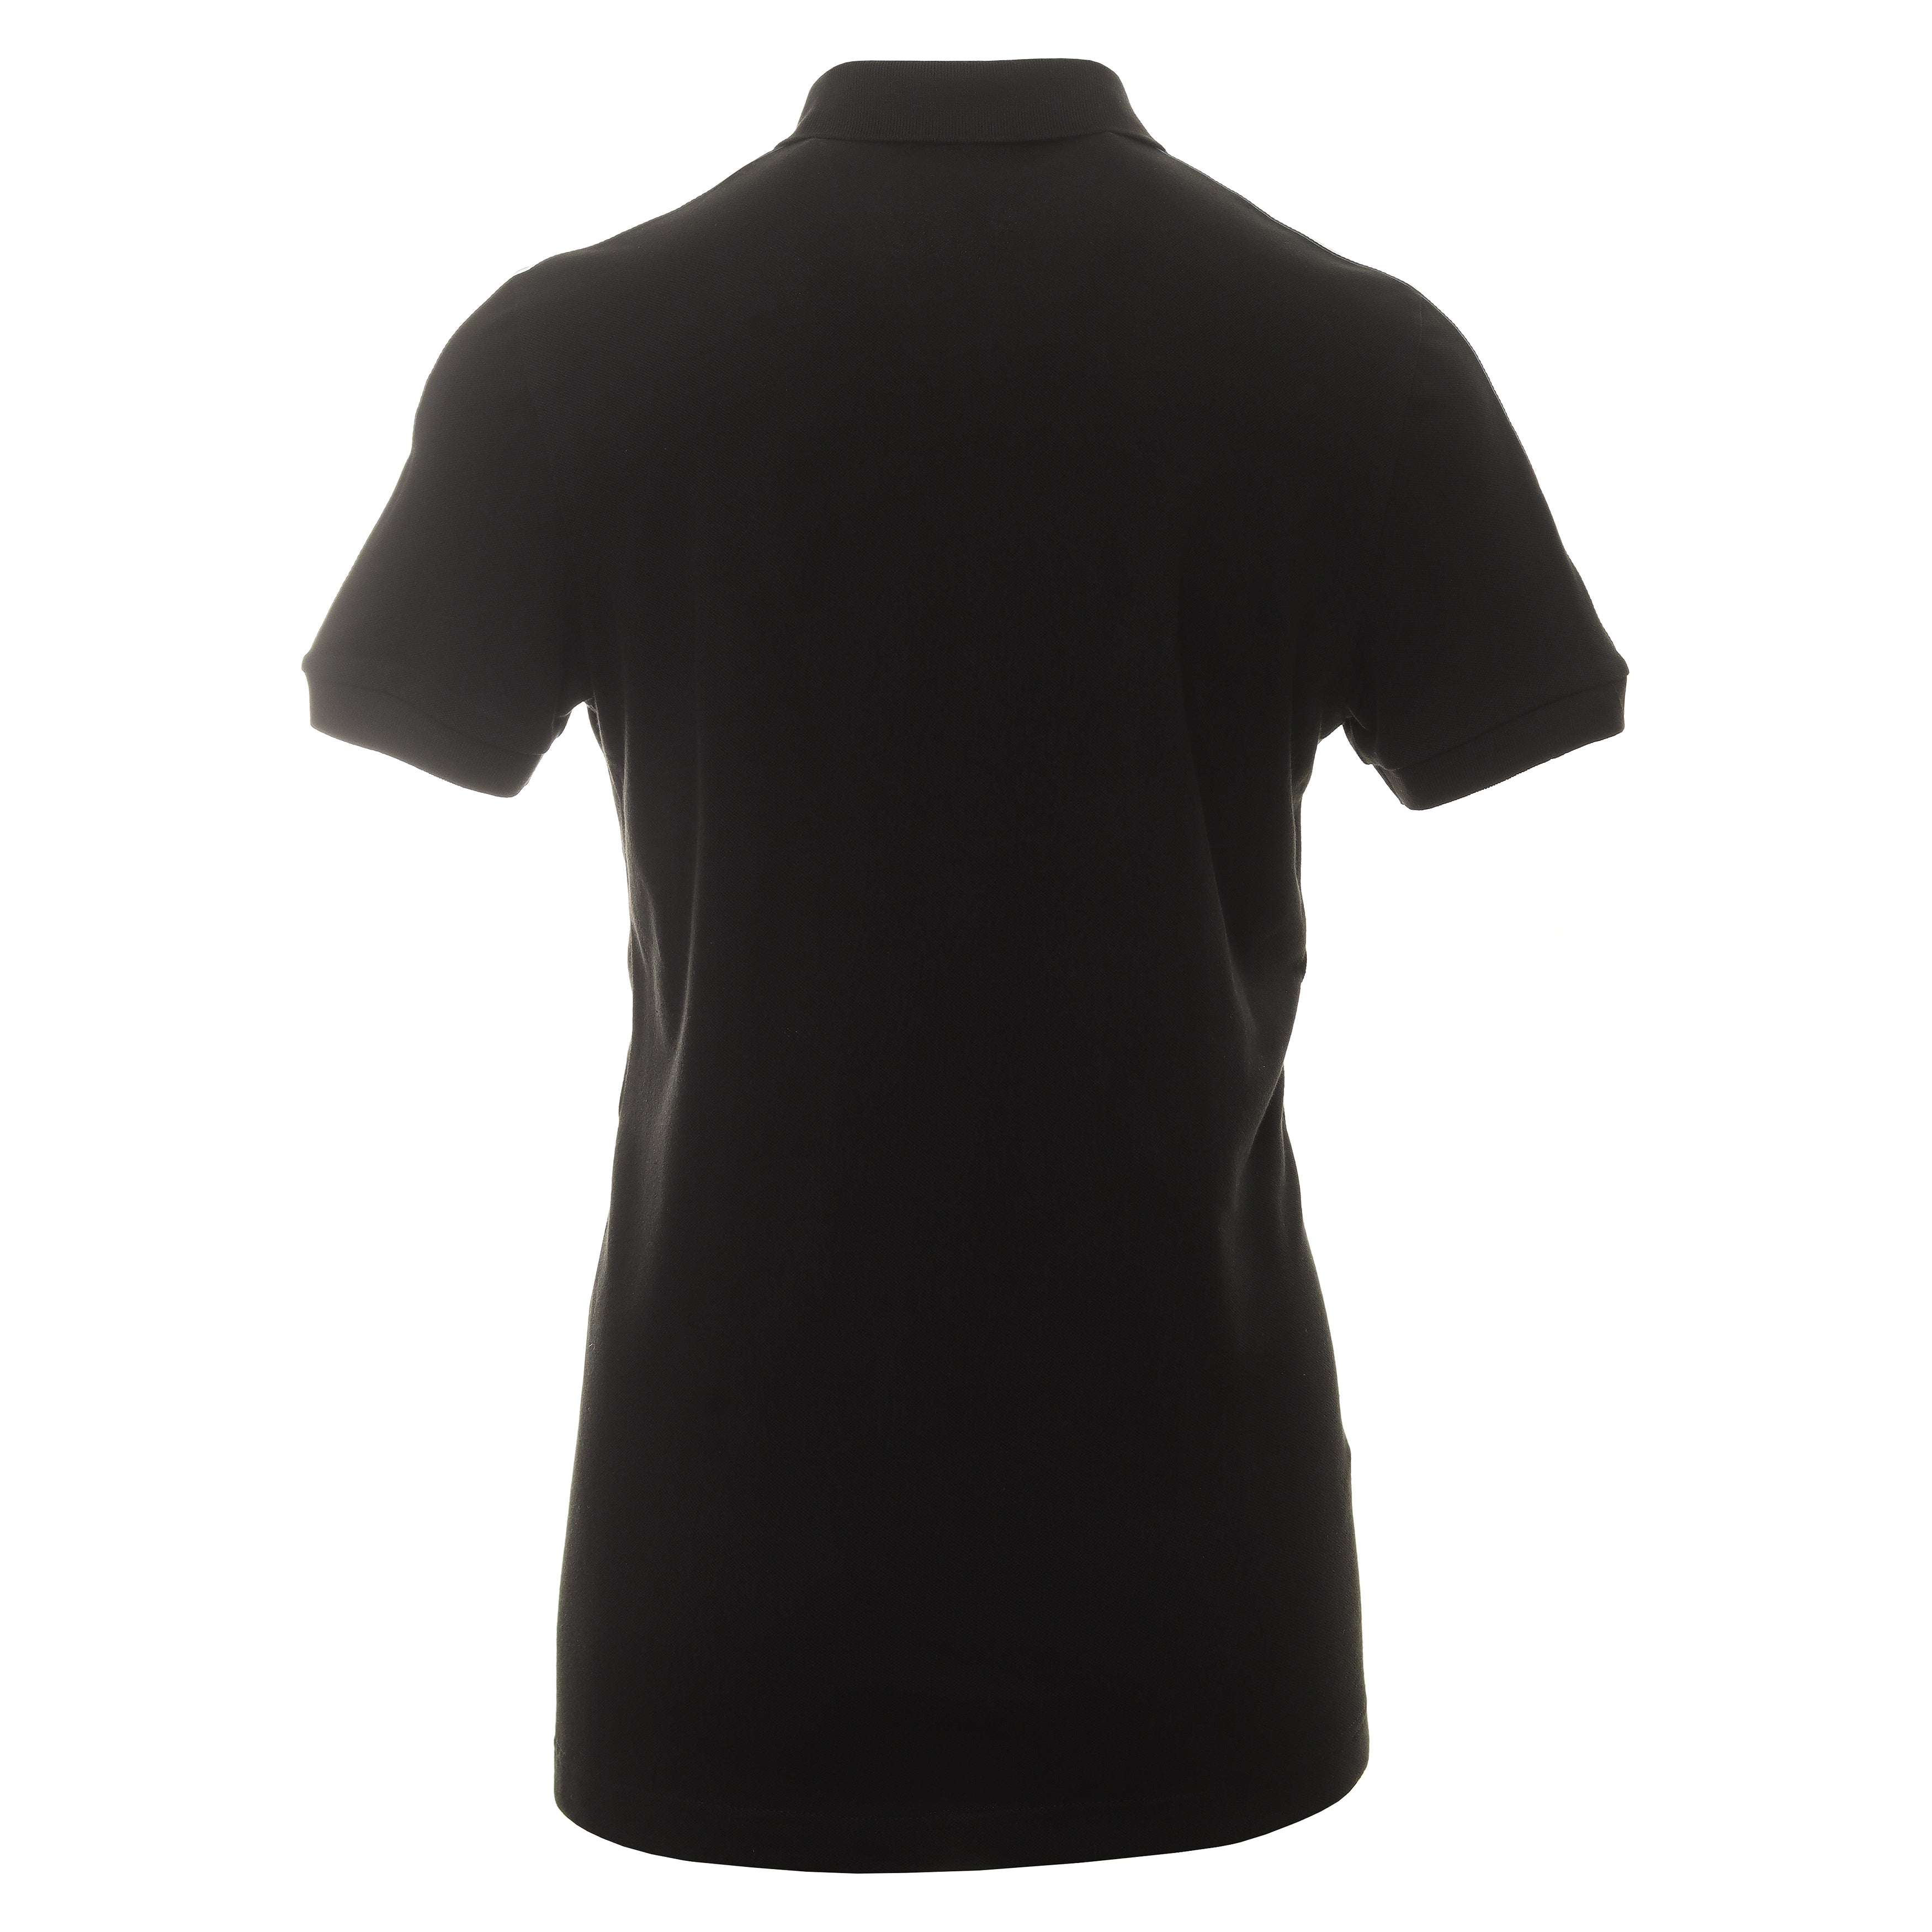 Lacoste Sleeve Tape Pique Polo Shirt PH5075 Black 031 | Function18 ...